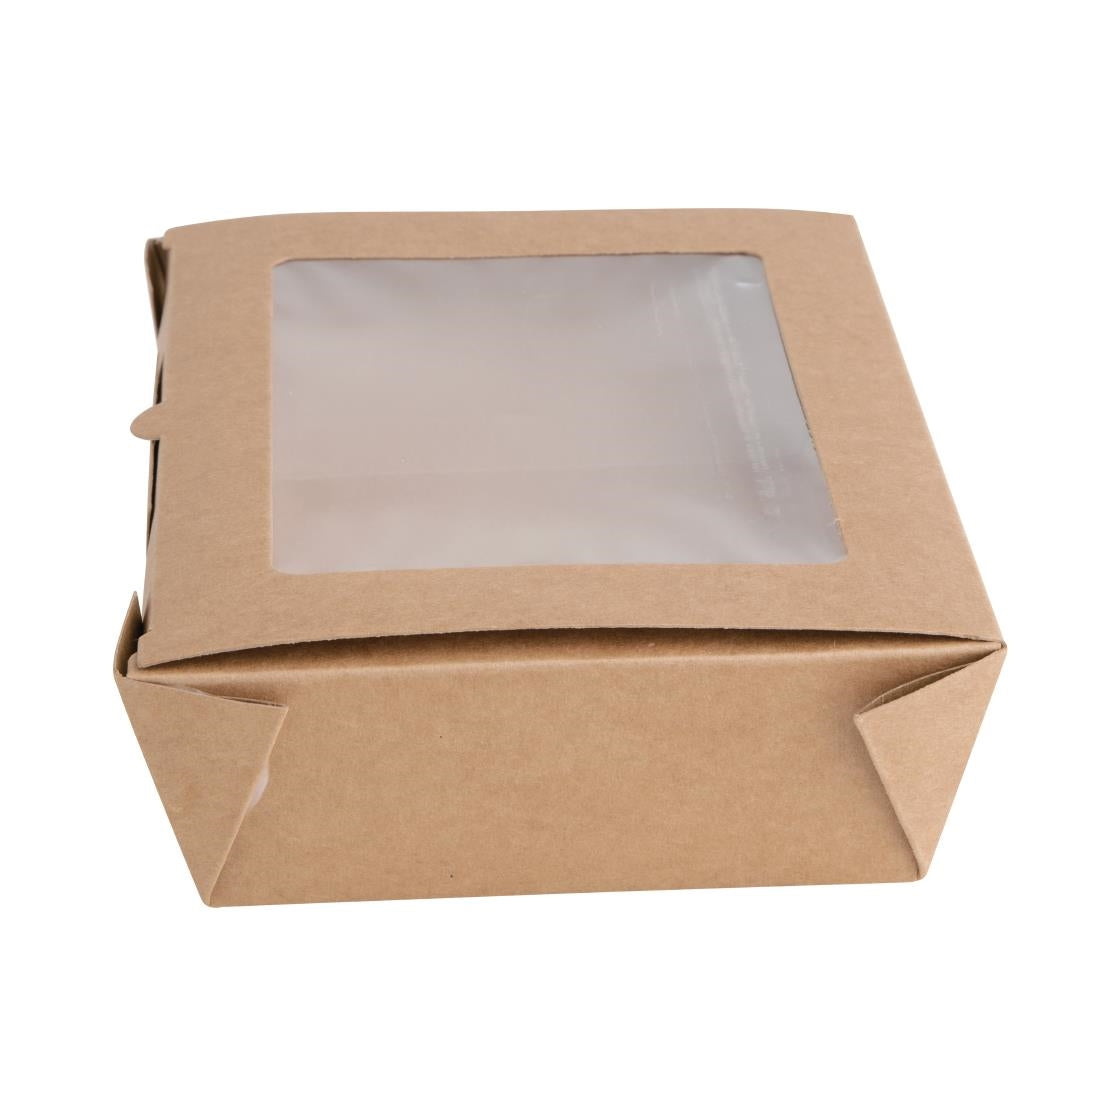 FB676 Fiesta Compostable Salad Boxes with PLA Windows 700ml (Pack of 200) JD Catering Equipment Solutions Ltd